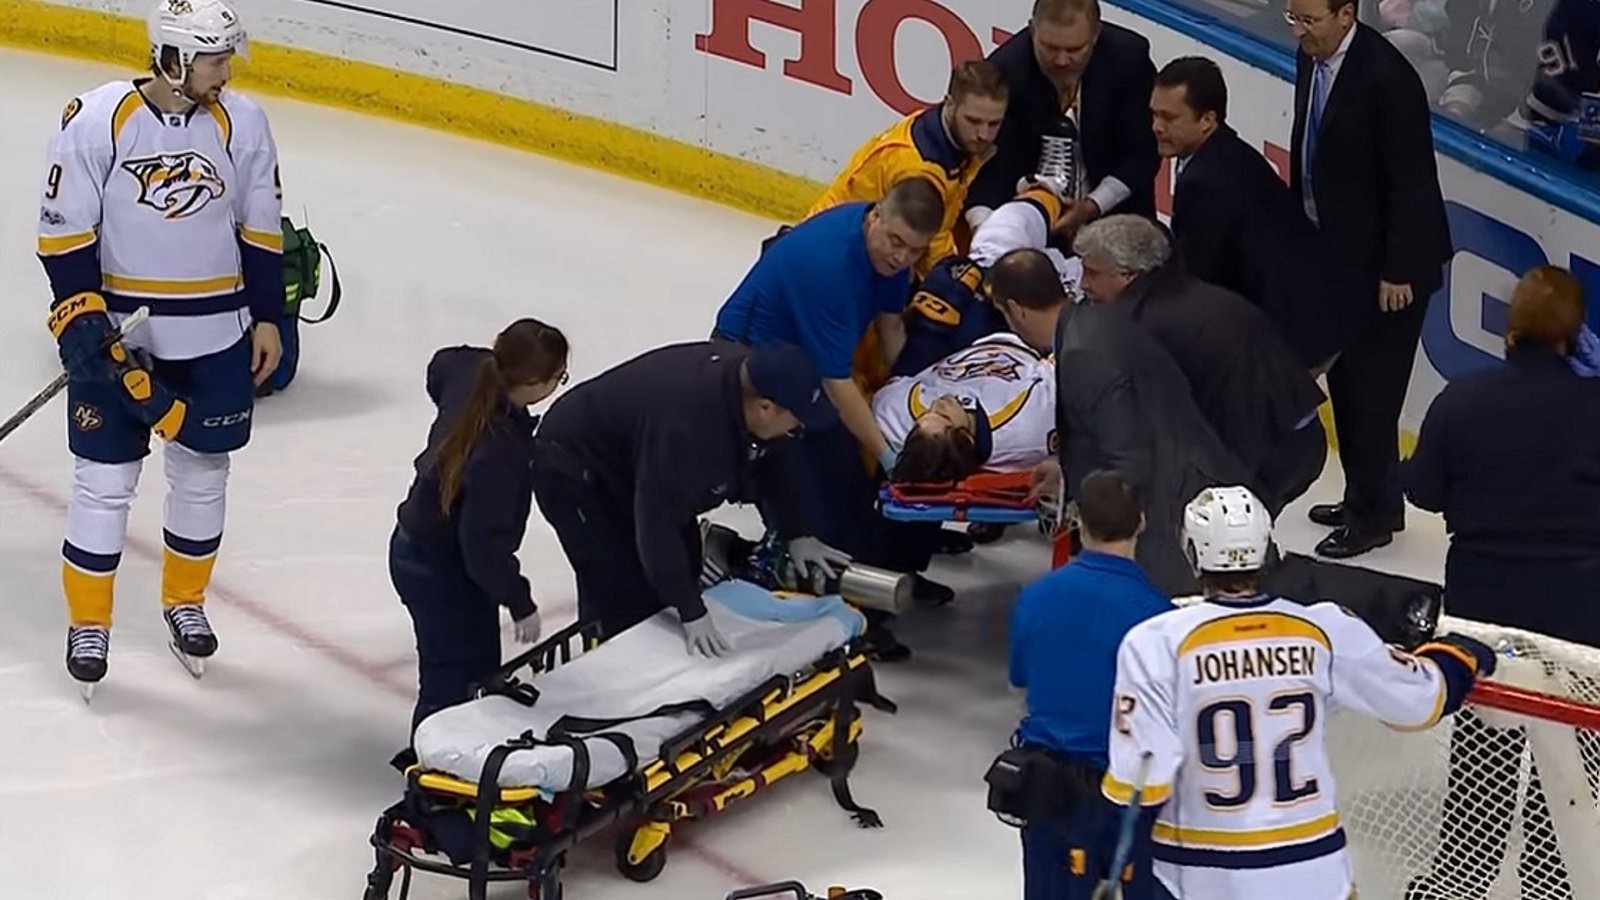 Minor update on Fiala after gruesome injury in Game 1.